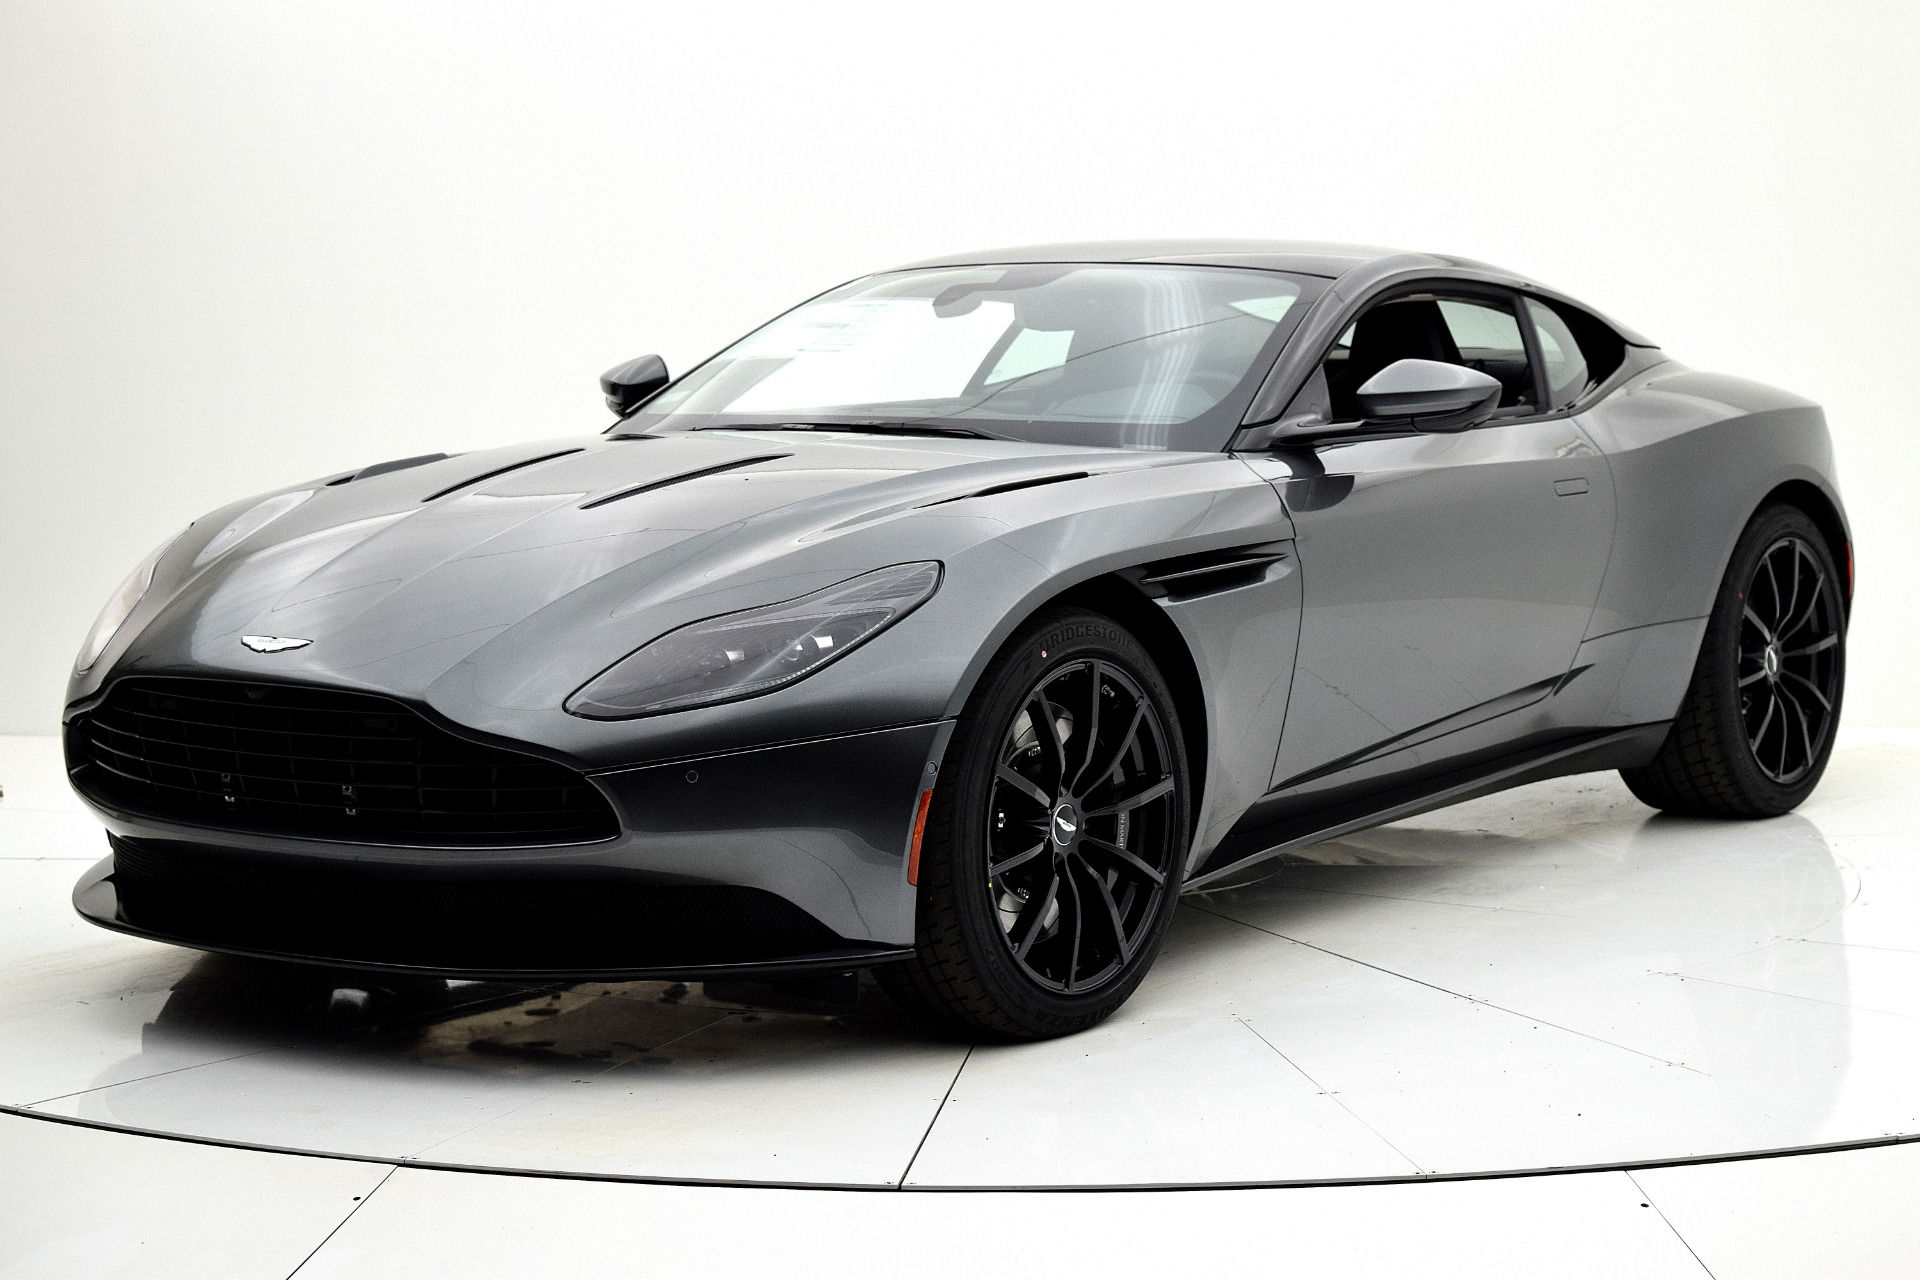 New 2020 Aston Martin Db11 Amr Coupe For Sale 258 366